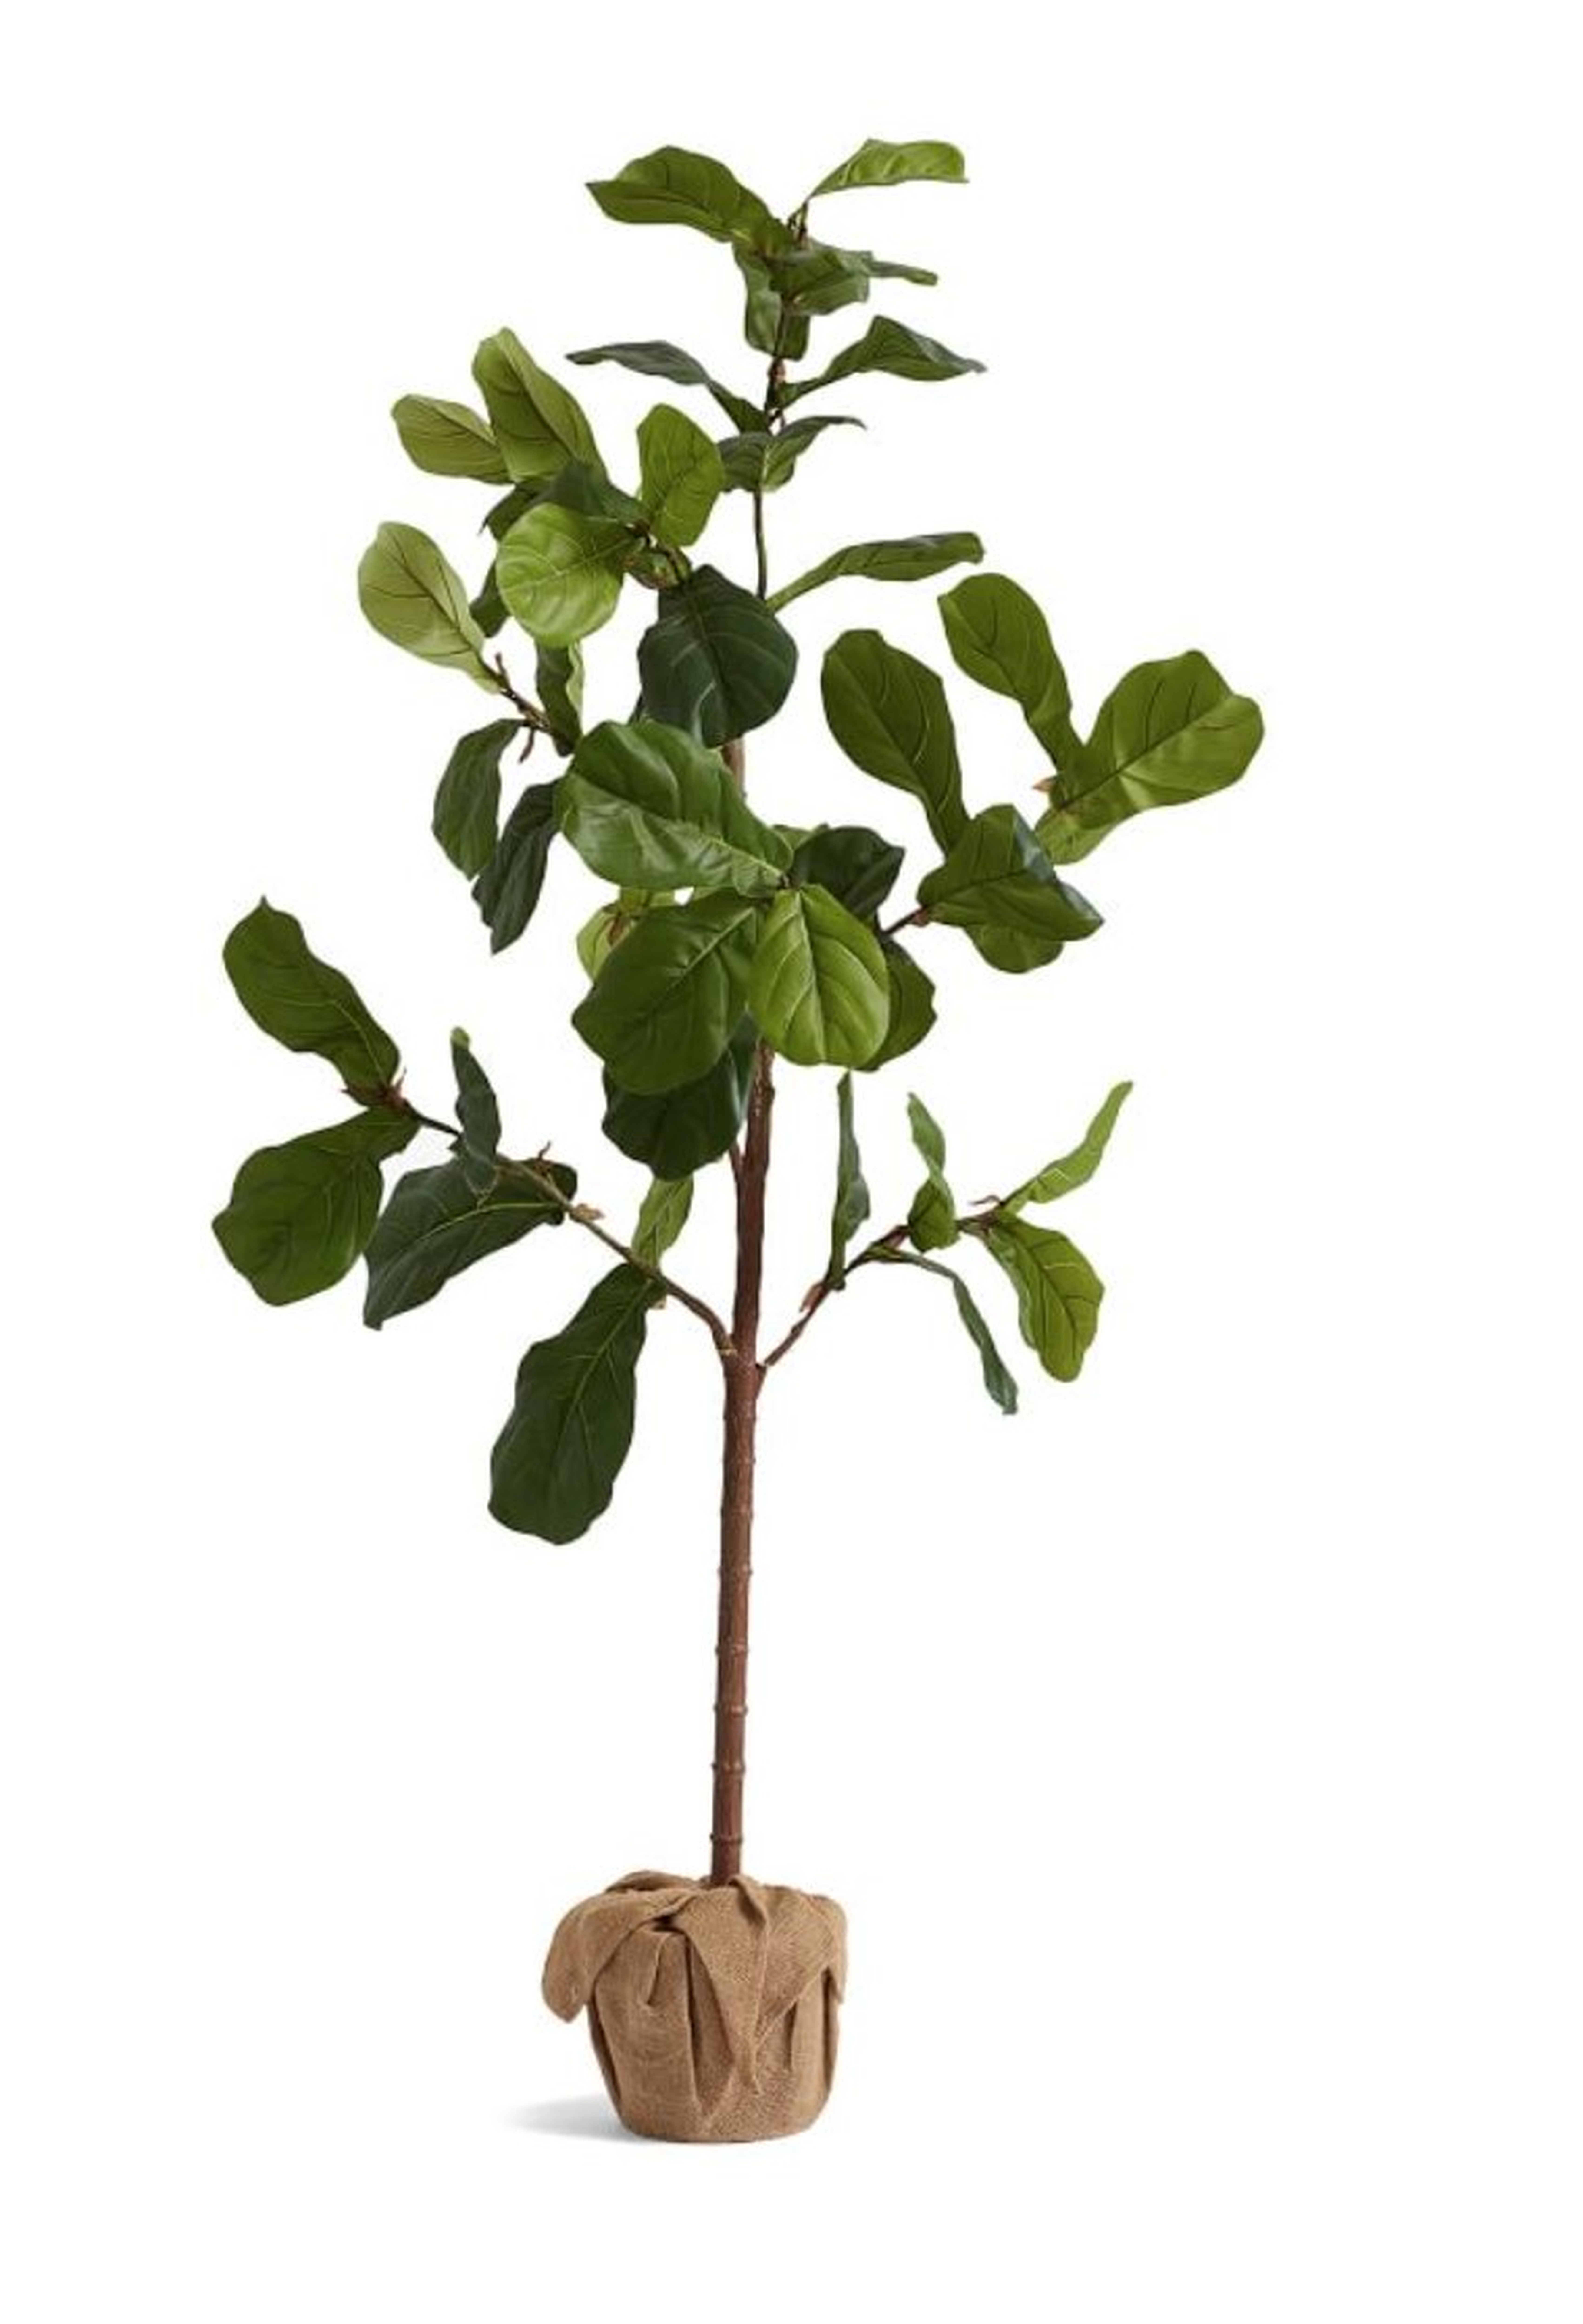 Faux Potted Fiddle Leaf Fig Tree, Medium, 5.4' - Pottery Barn